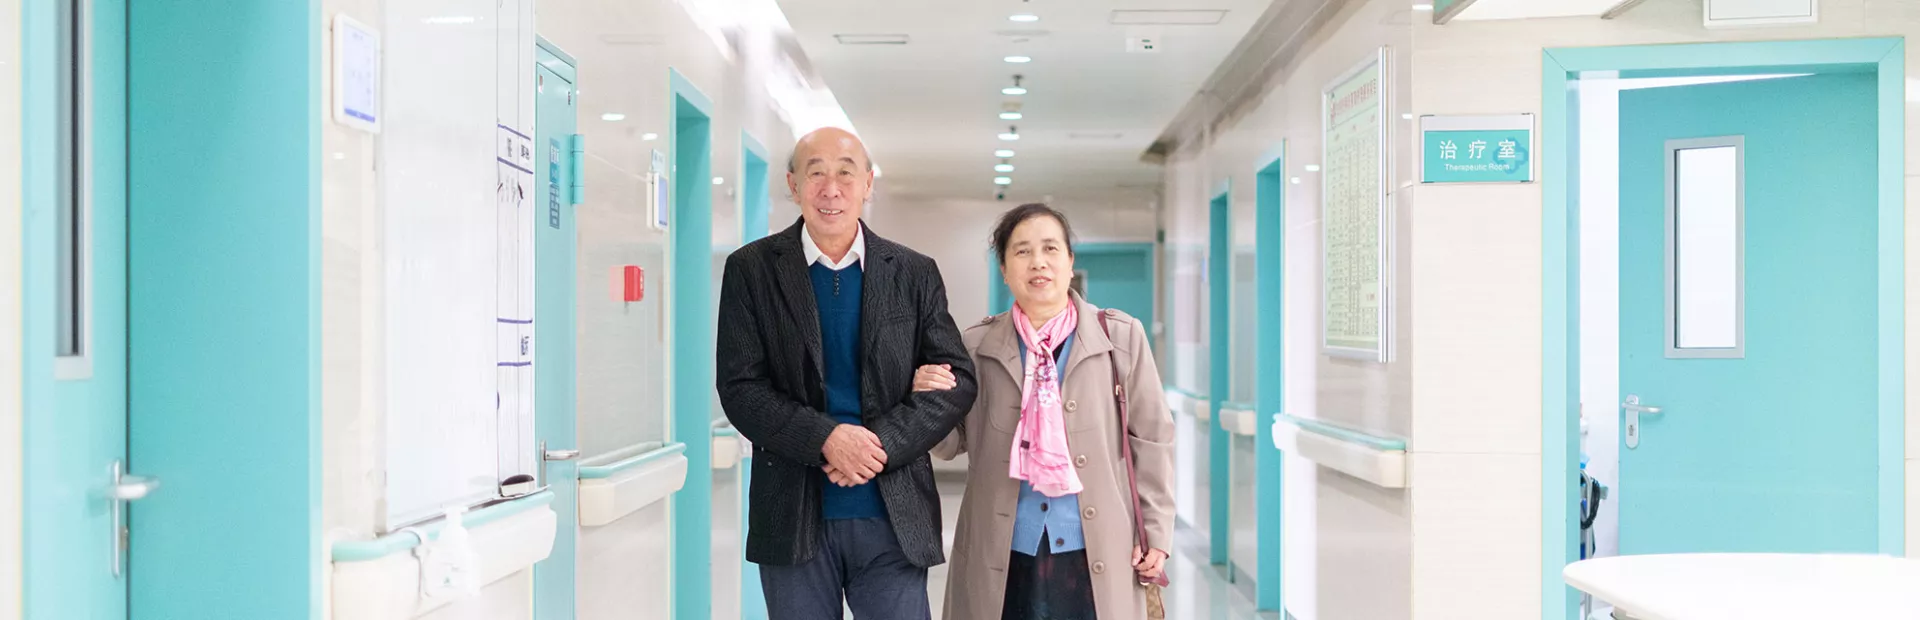 A couple in a hospital in China